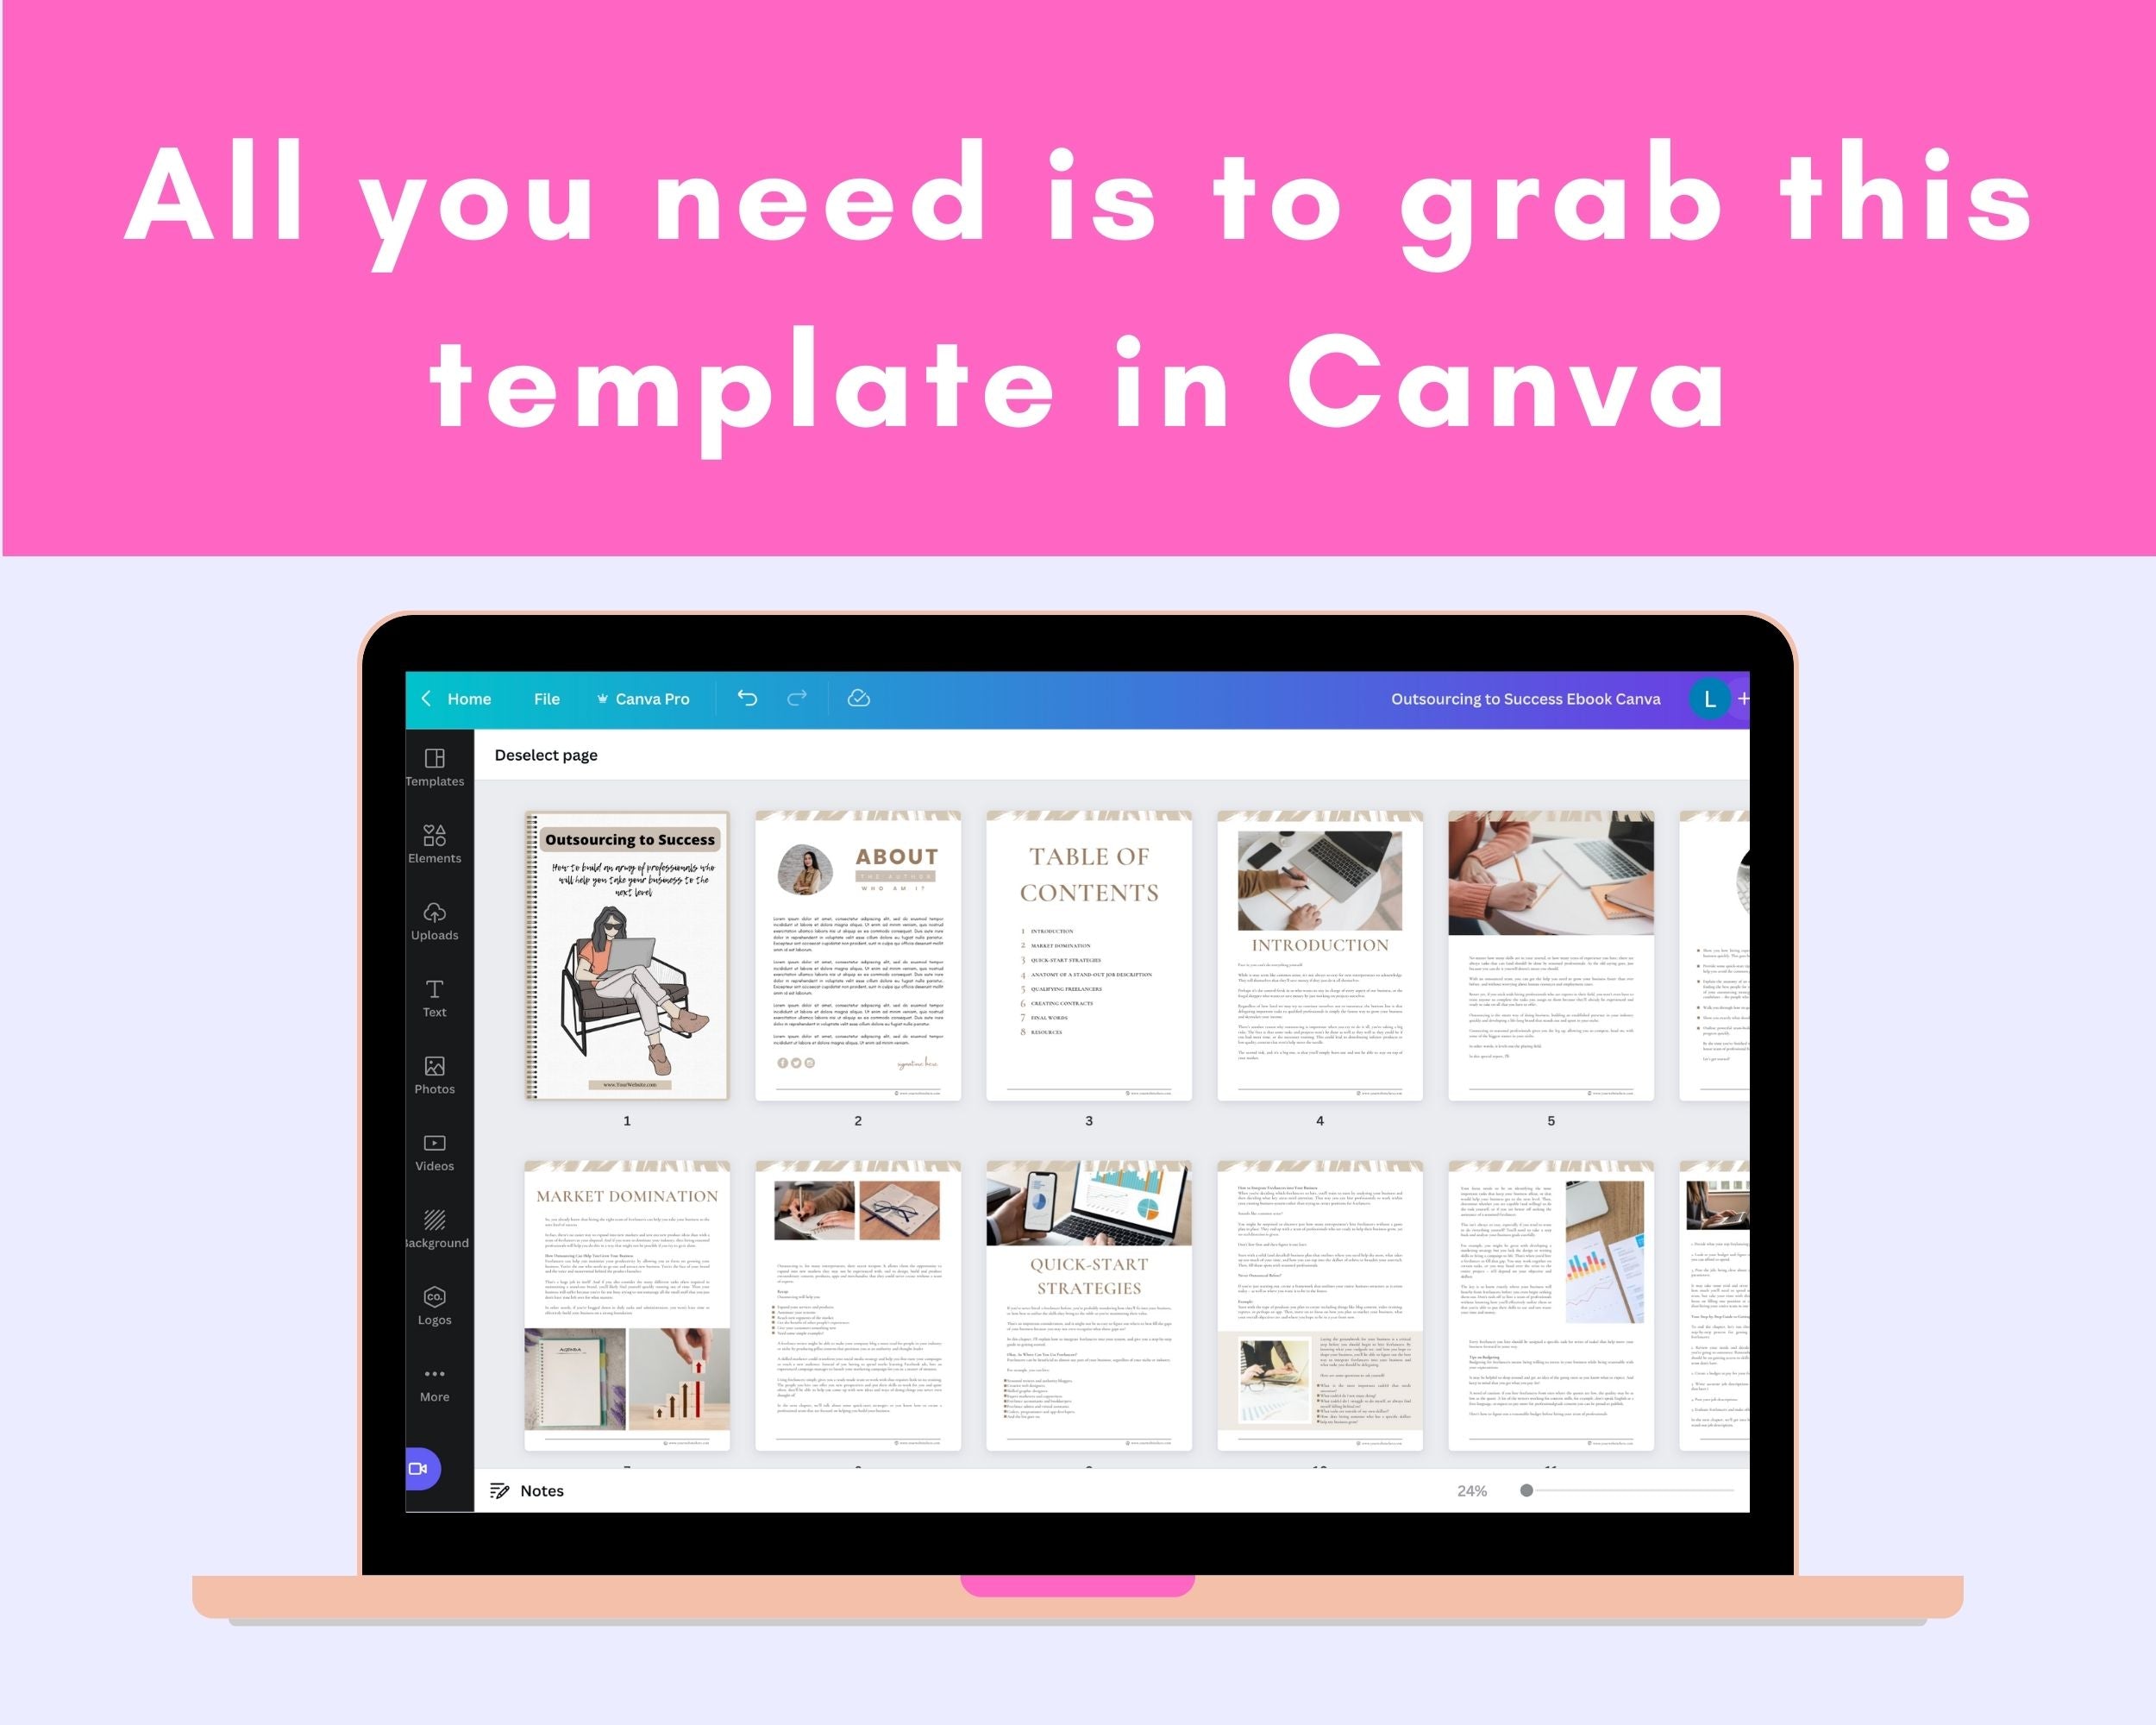 Editable Outsourcing To Success Ebook | Done-for-You Ebook in Canva | Rebrandable and Resizable Canva Template